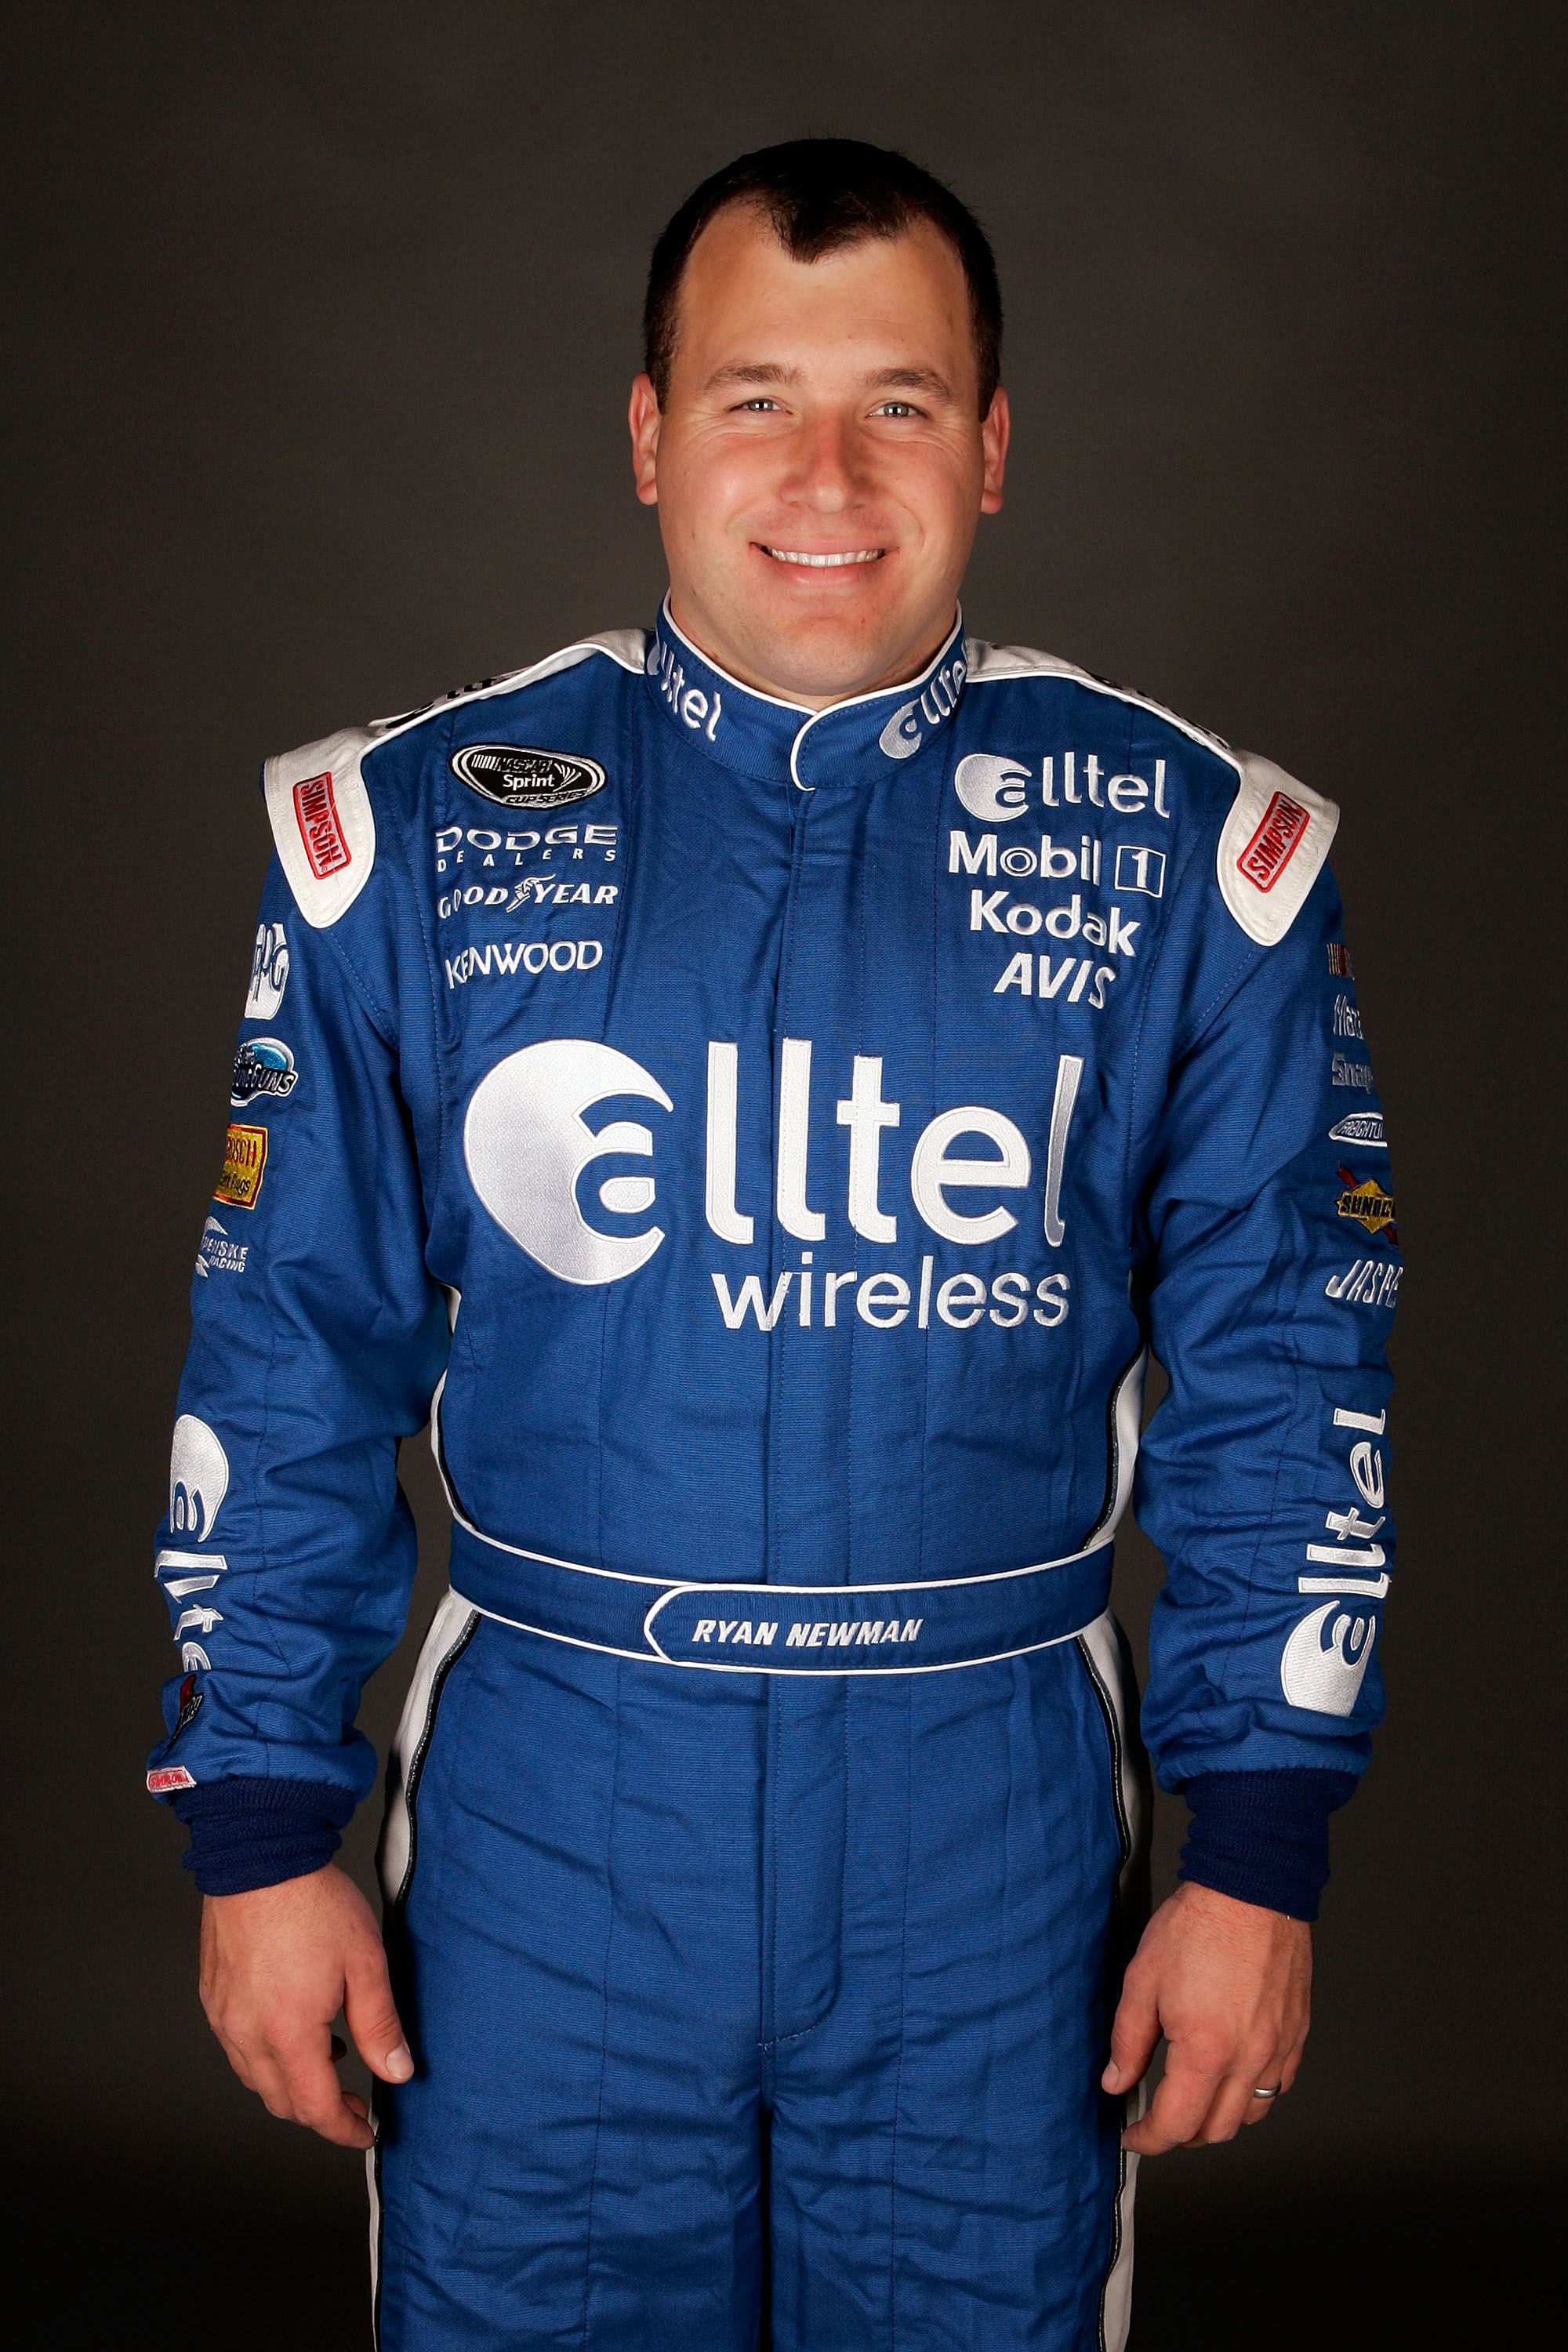 Ryan Newman poses for a photo during the NASCAR Sprint Cup Series media day at Daytona International Speedway on February 7, 2008 in Daytona, Florida. | Source: Getty Images